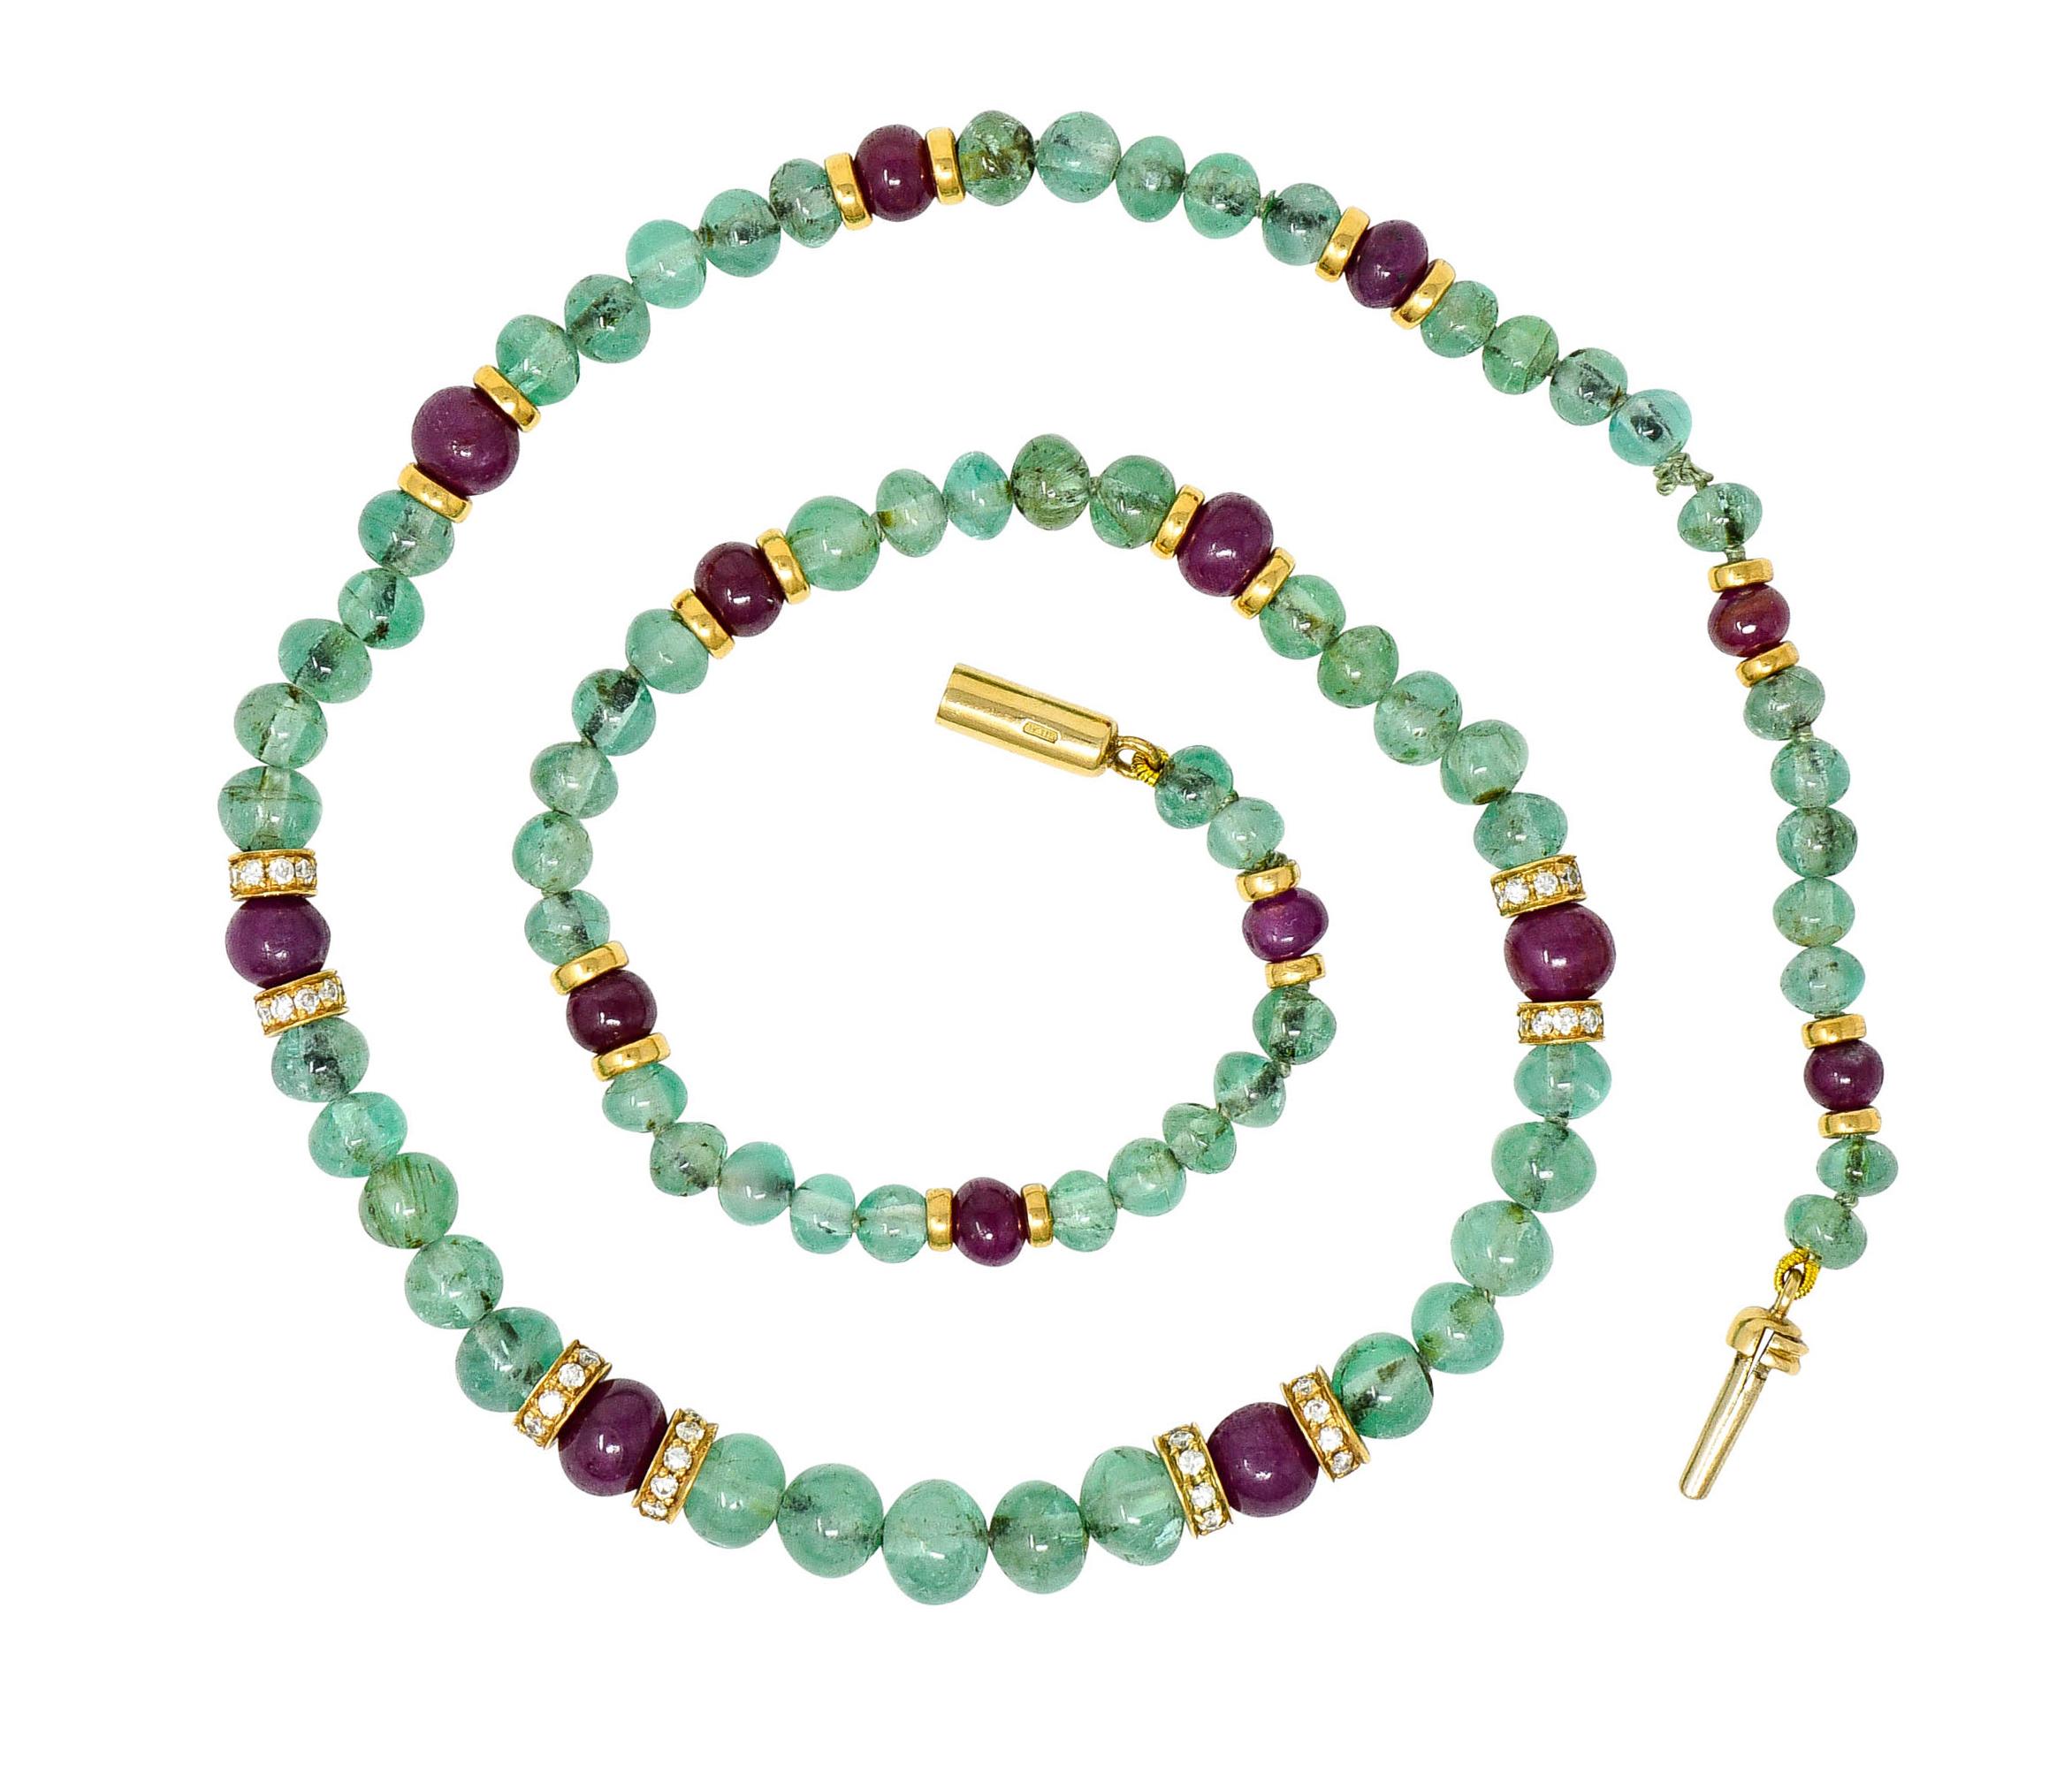 Strand necklace is comprised of tumbled ruby and emerald beads

Graduating in size from 4.5 mm to 6.5 mm

Emeralds are well matched in medium light bluish green color and semi-transparent with natural inclusions

Rubies are a well matched